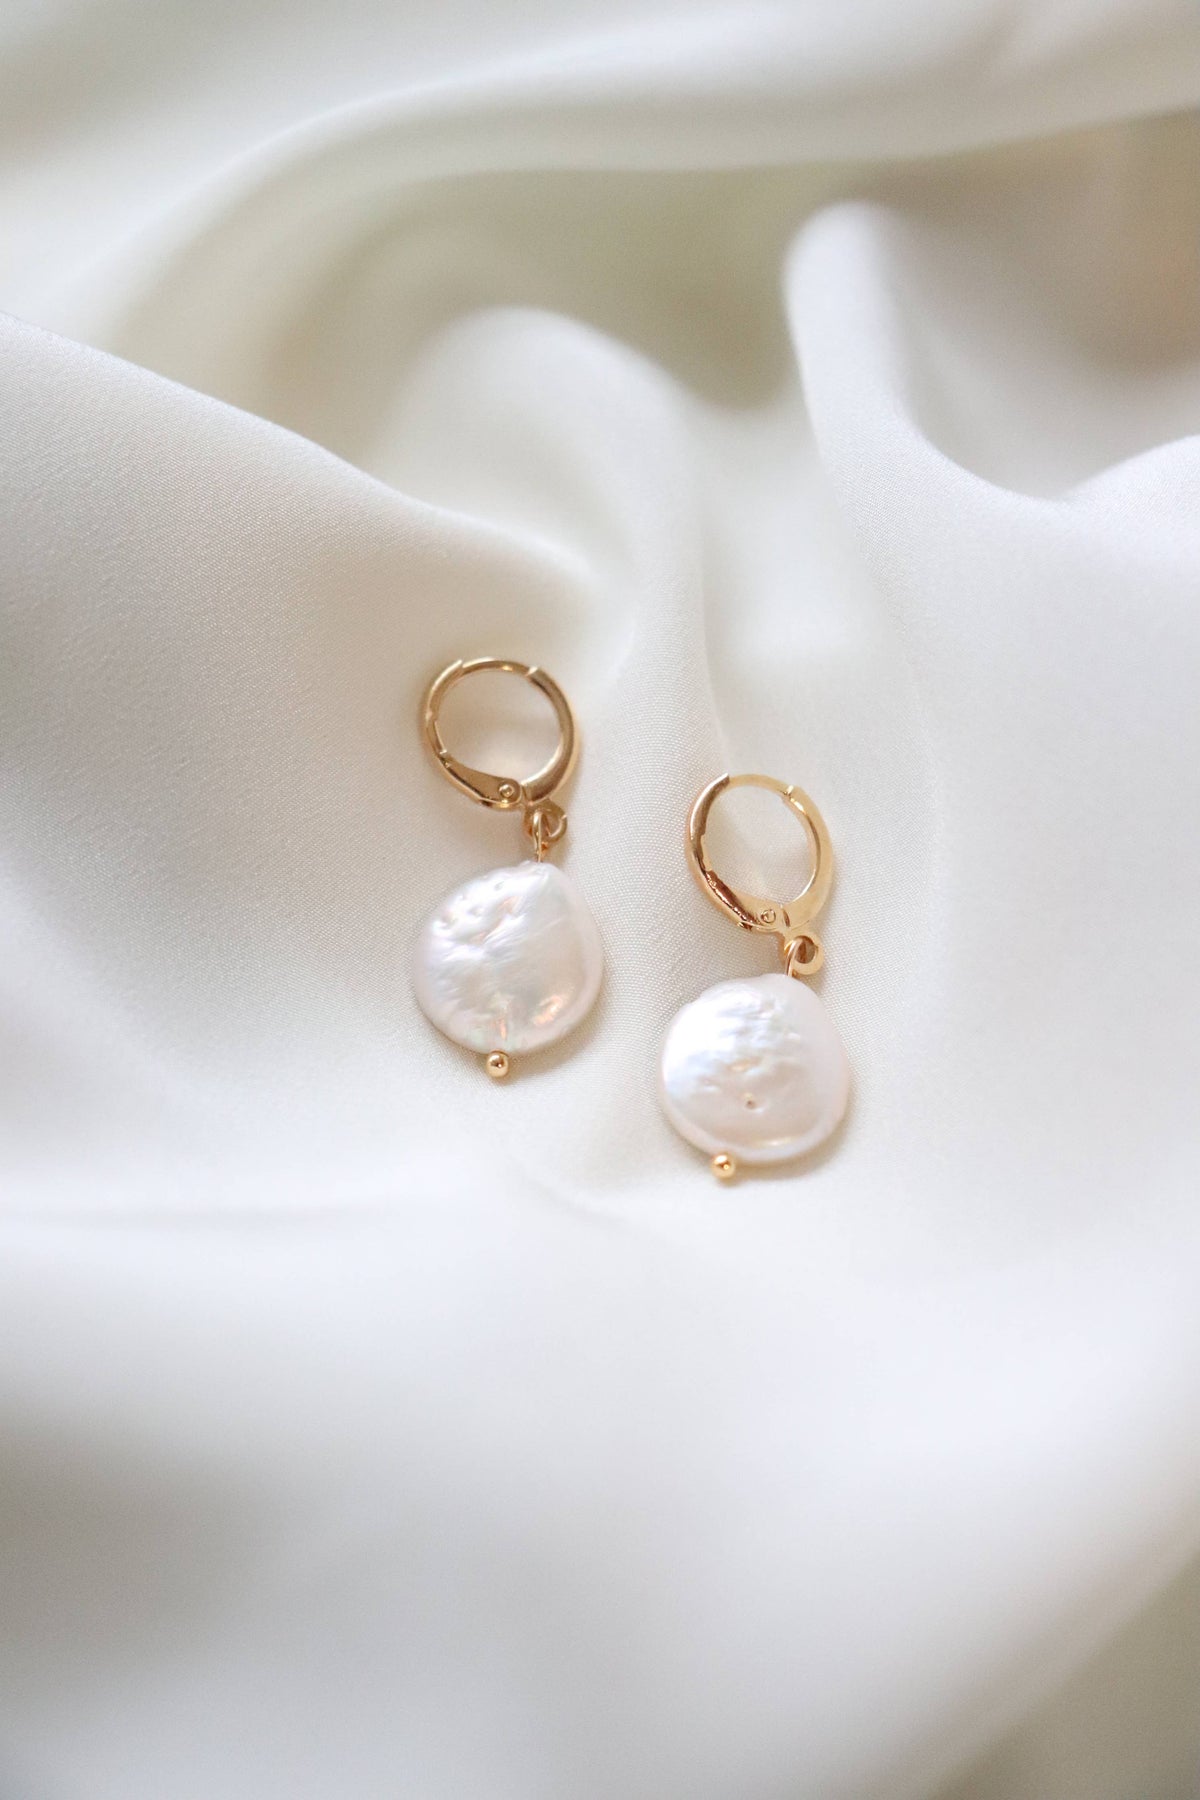 Our new Pearl Huggie Earrings have quickly become best sellers, they make great gifts and are so on trend. 18K gold plated hoop with natural pearl accent.